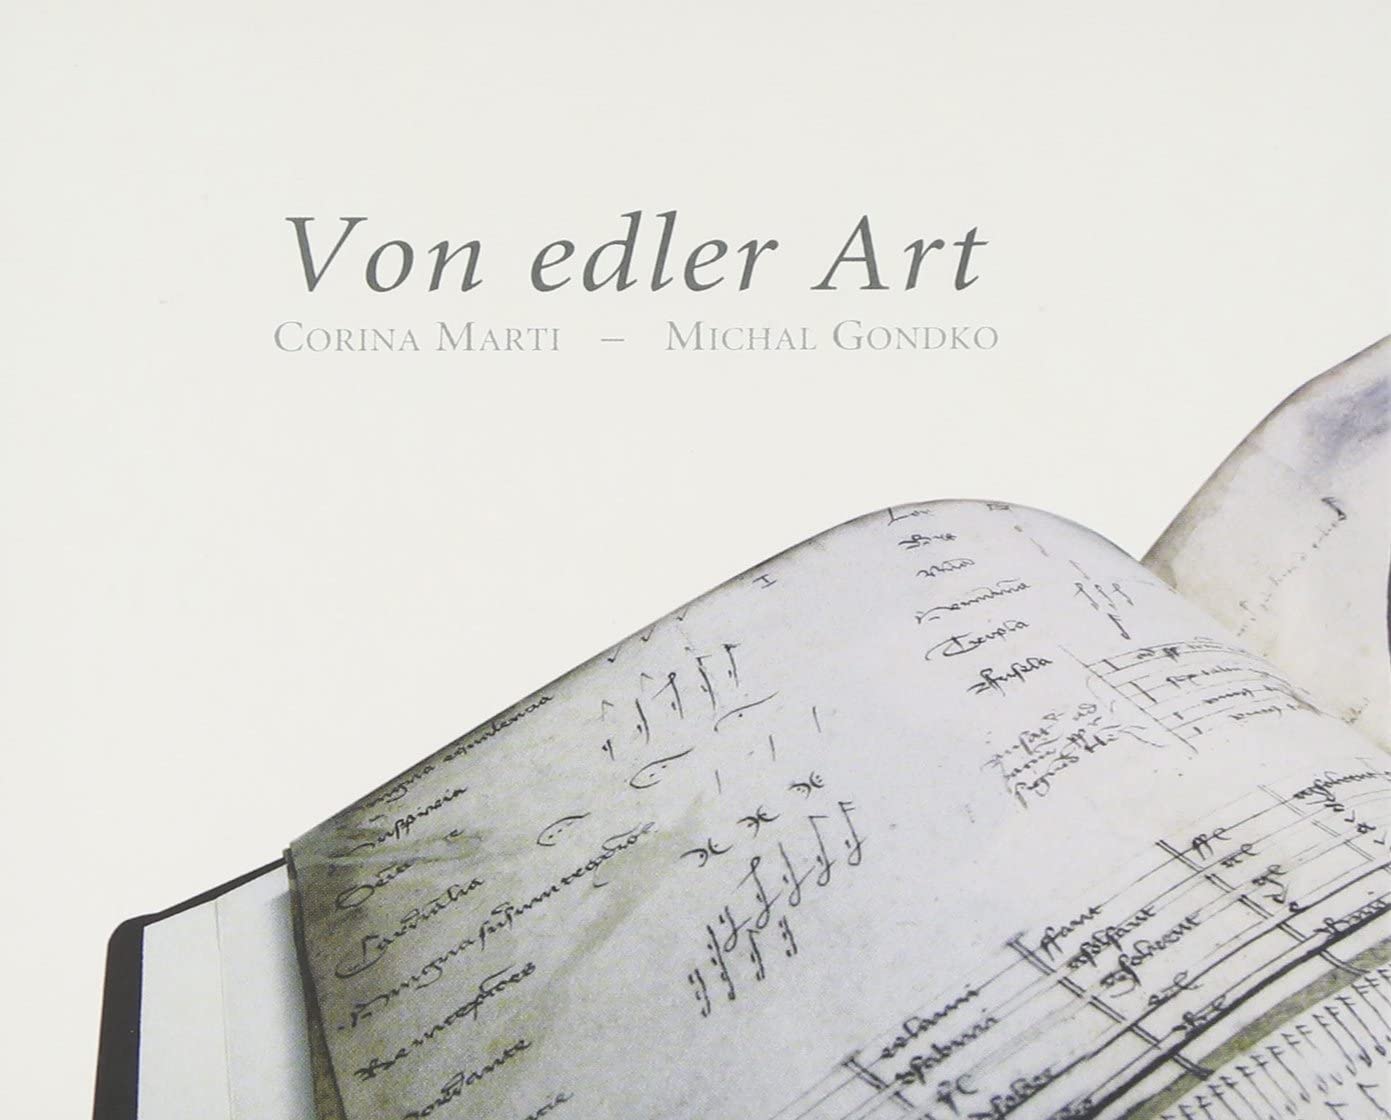 Von edler Art - Music for Keyboard and Plucked Instruments from 15th Century German Manuscripts